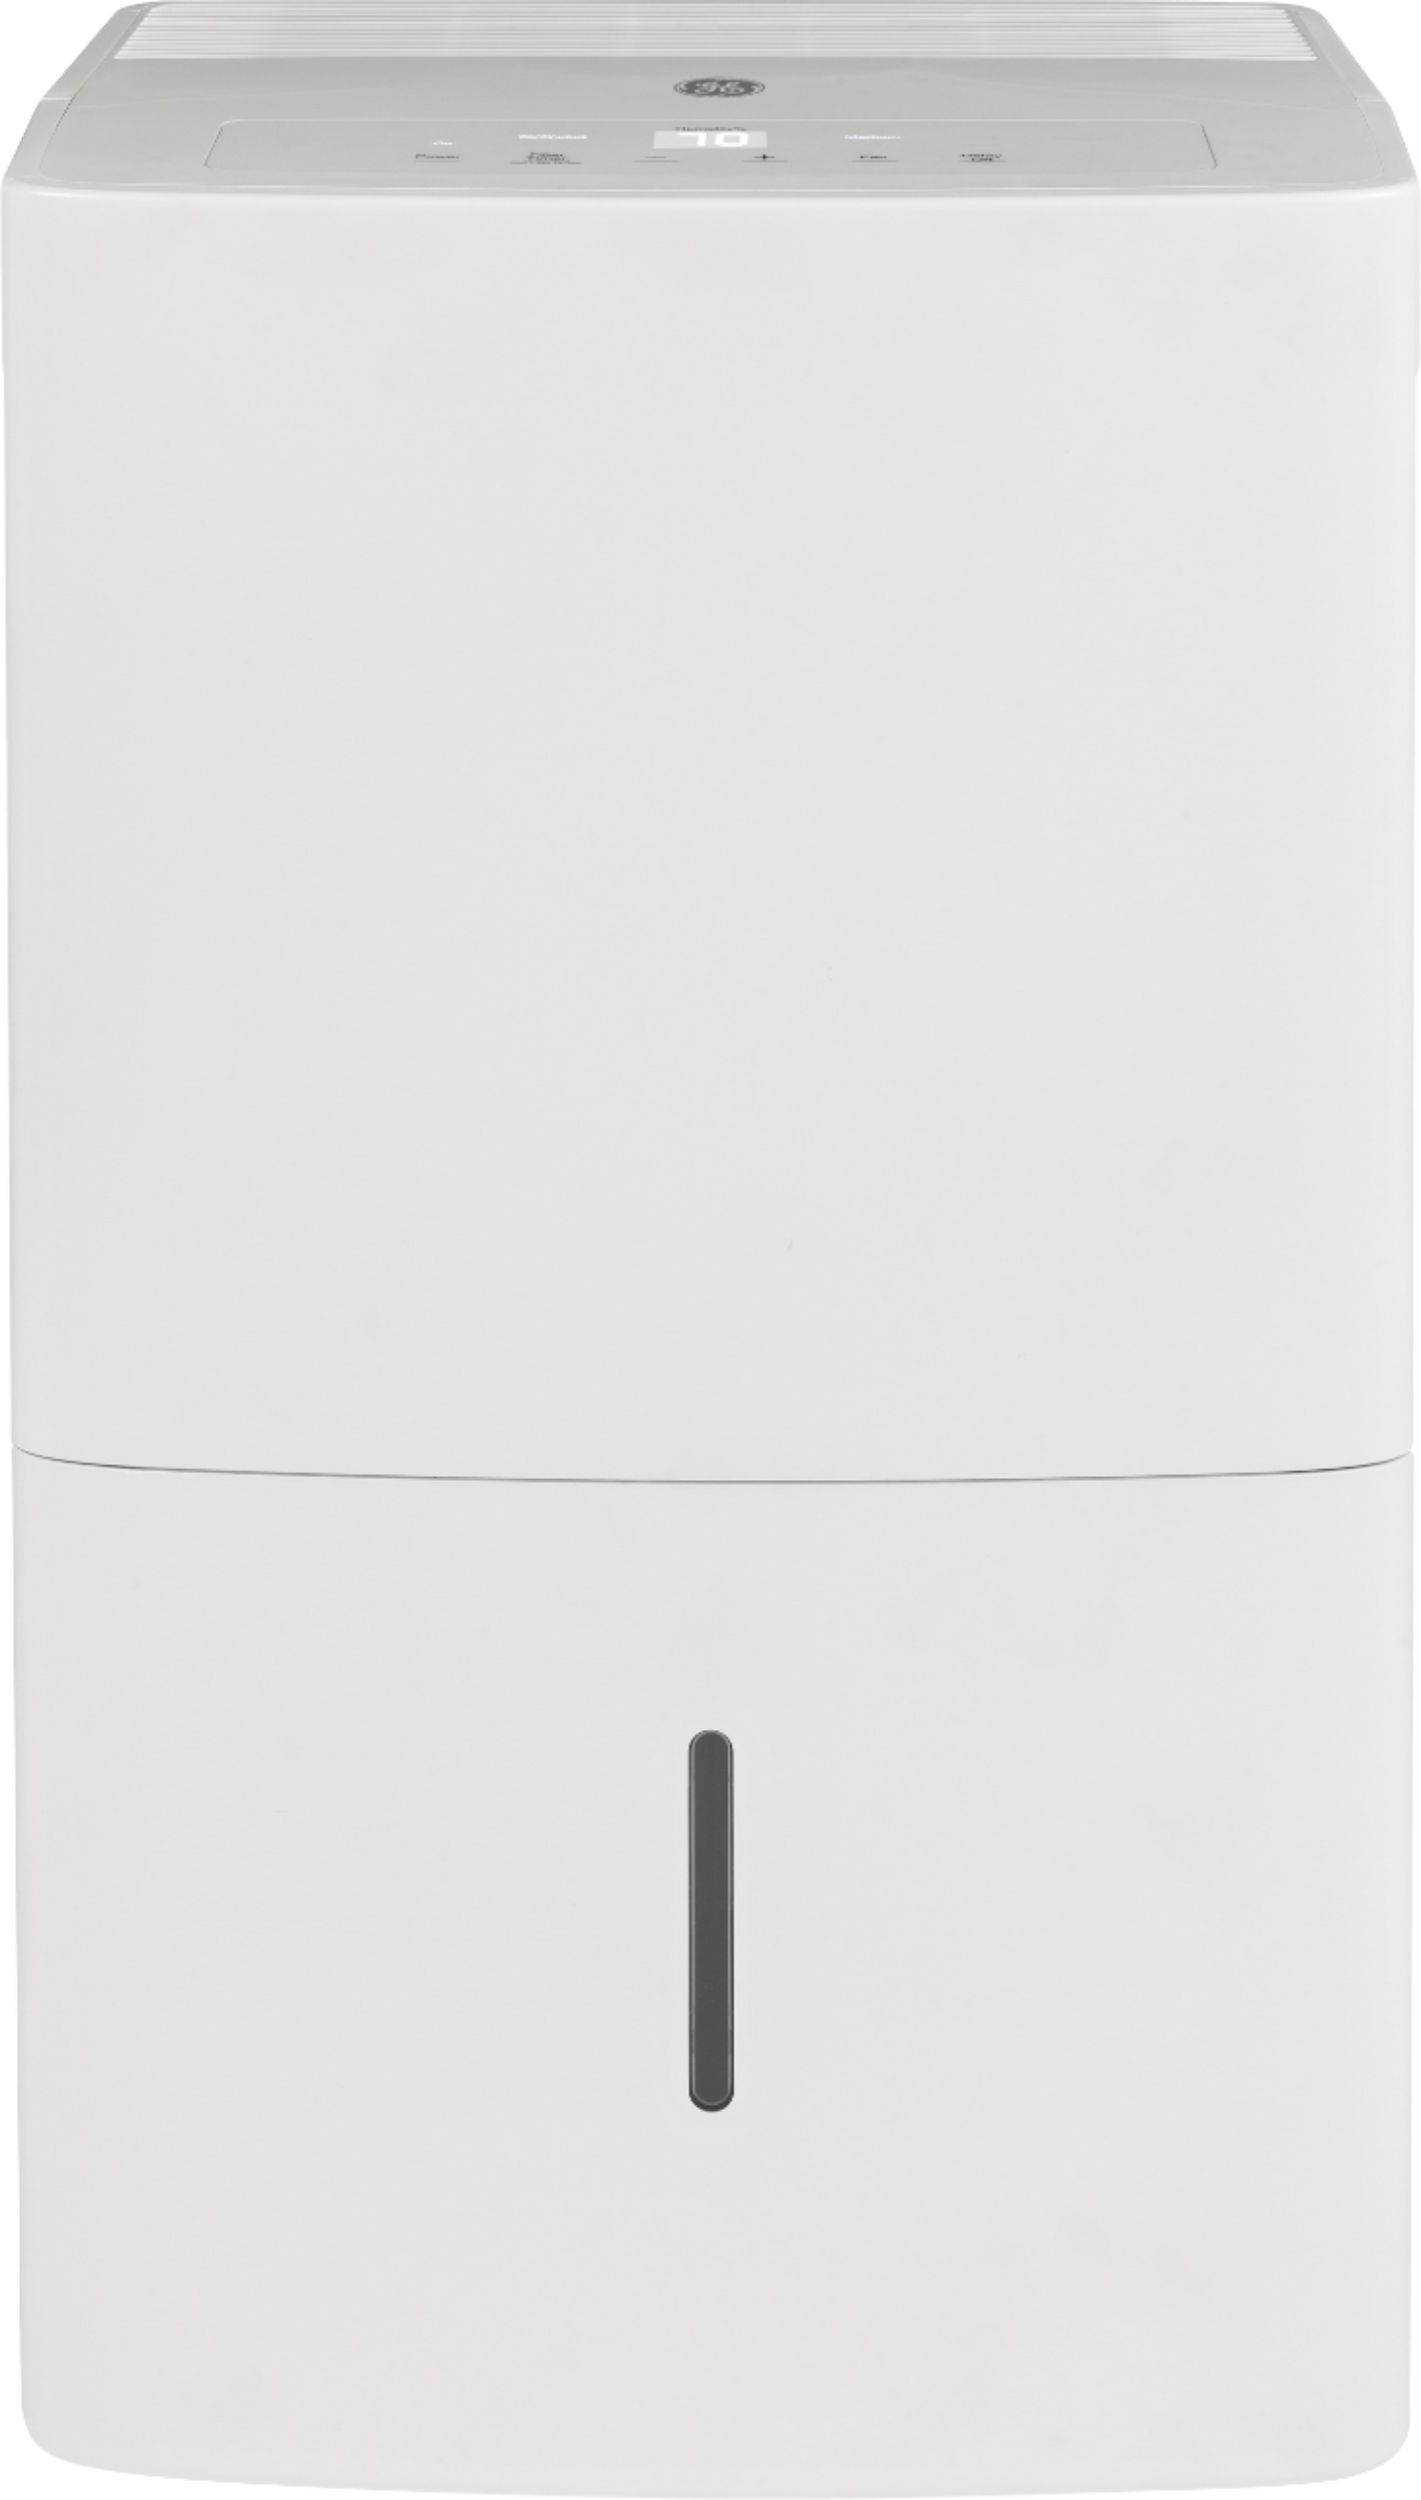 GE Energy Star 50-pint Portable Dehumidifier White ADHB50LZ for sale online